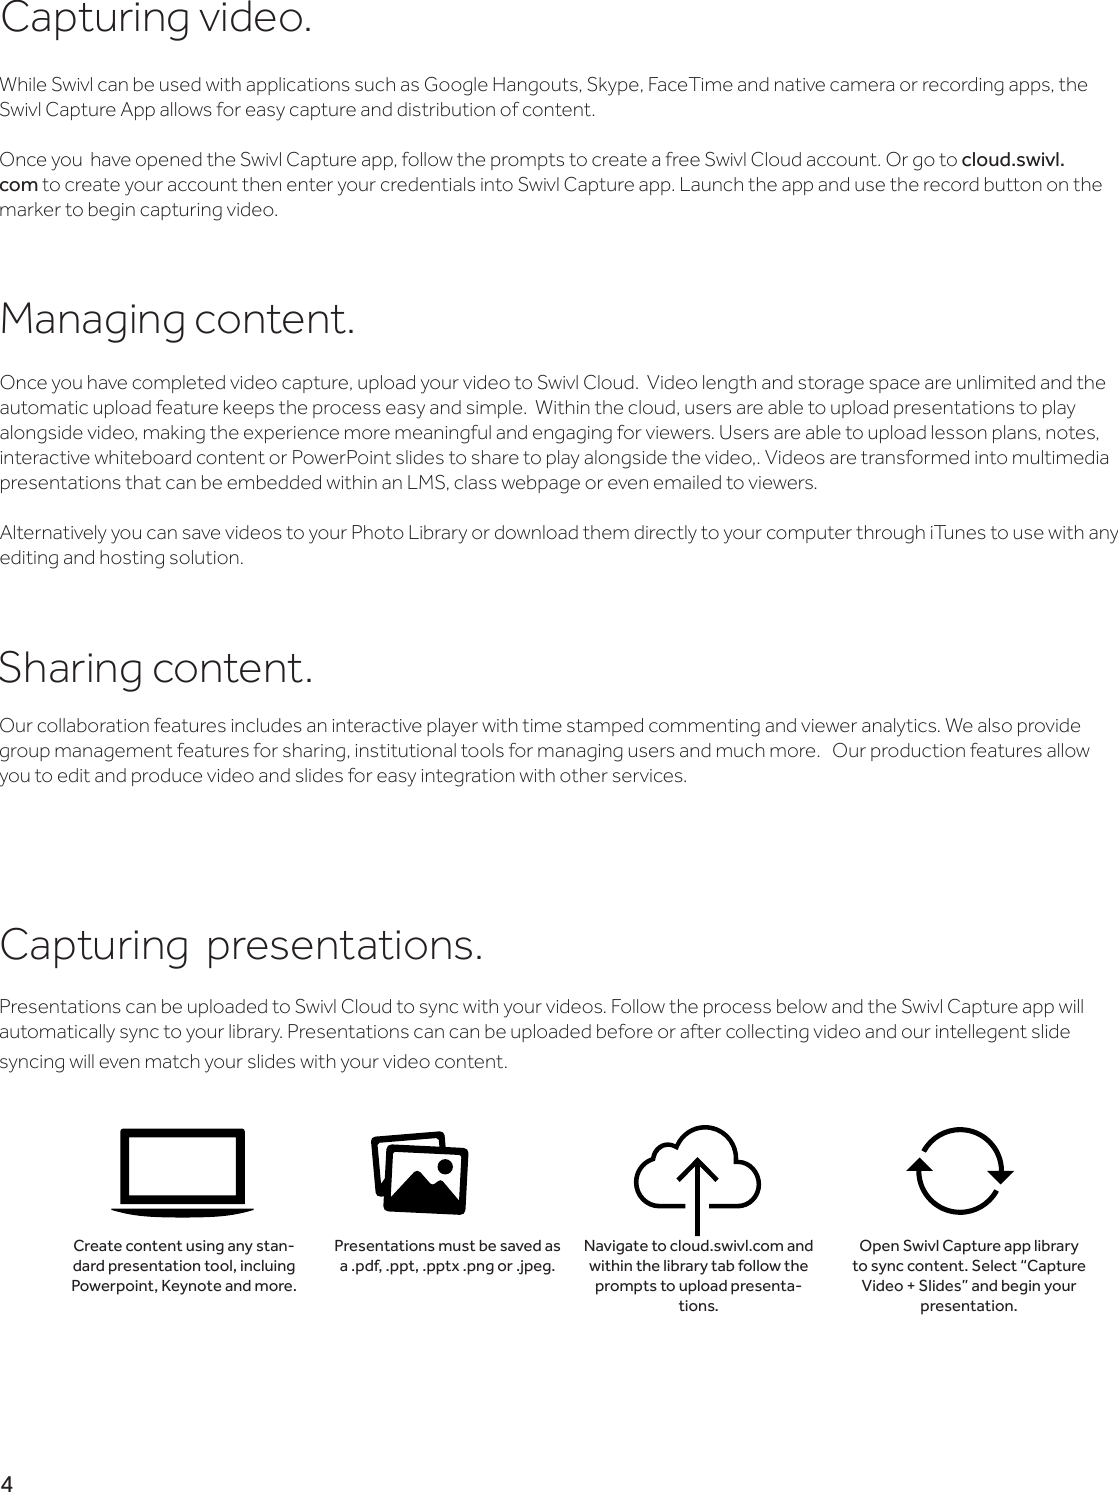 Capturing  presentations.Presentations can be uploaded to Swivl Cloud to sync with your videos. Follow the process below and the Swivl Capture app will automatically sync to your library. Presentations can can be uploaded before or after collecting video and our intellegent slide syncing will even match your slides with your video content.Create content using any stan-dard presentation tool, incluing Powerpoint, Keynote and more.Presentations must be saved as a .pdf, .ppt, .pptx .png or .jpeg. Navigate to cloud.swivl.com and within the library tab follow the prompts to upload presenta-tions.Open Swivl Capture app library to sync content. Select “Capture Video + Slides” and begin your presentation.4Capturing video.While Swivl can be used with applications such as Google Hangouts, Skype, FaceTime and native camera or recording apps, the Swivl Capture App allows for easy capture and distribution of content. Once you  have opened the Swivl Capture app, follow the prompts to create a free Swivl Cloud account. Or go to cloud.swivl.com to create your account then enter your credentials into Swivl Capture app. Launch the app and use the record button on the marker to begin capturing video. Managing content.Once you have completed video capture, upload your video to Swivl Cloud.  Video length and storage space are unlimited and the automatic upload feature keeps the process easy and simple.  Within the cloud, users are able to upload presentations to play alongside video, making the experience more meaningful and engaging for viewers. Users are able to upload lesson plans, notes, interactive whiteboard content or PowerPoint slides to share to play alongside the video,. Videos are transformed into multimedia presentations that can be embedded within an LMS, class webpage or even emailed to viewers.Alternatively you can save videos to your Photo Library or download them directly to your computer through iTunes to use with any editing and hosting solution.Sharing content.Our collaboration features includes an interactive player with time stamped commenting and viewer analytics. We also provide group management features for sharing, institutional tools for managing users and much more.   Our production features allow you to edit and produce video and slides for easy integration with other services.